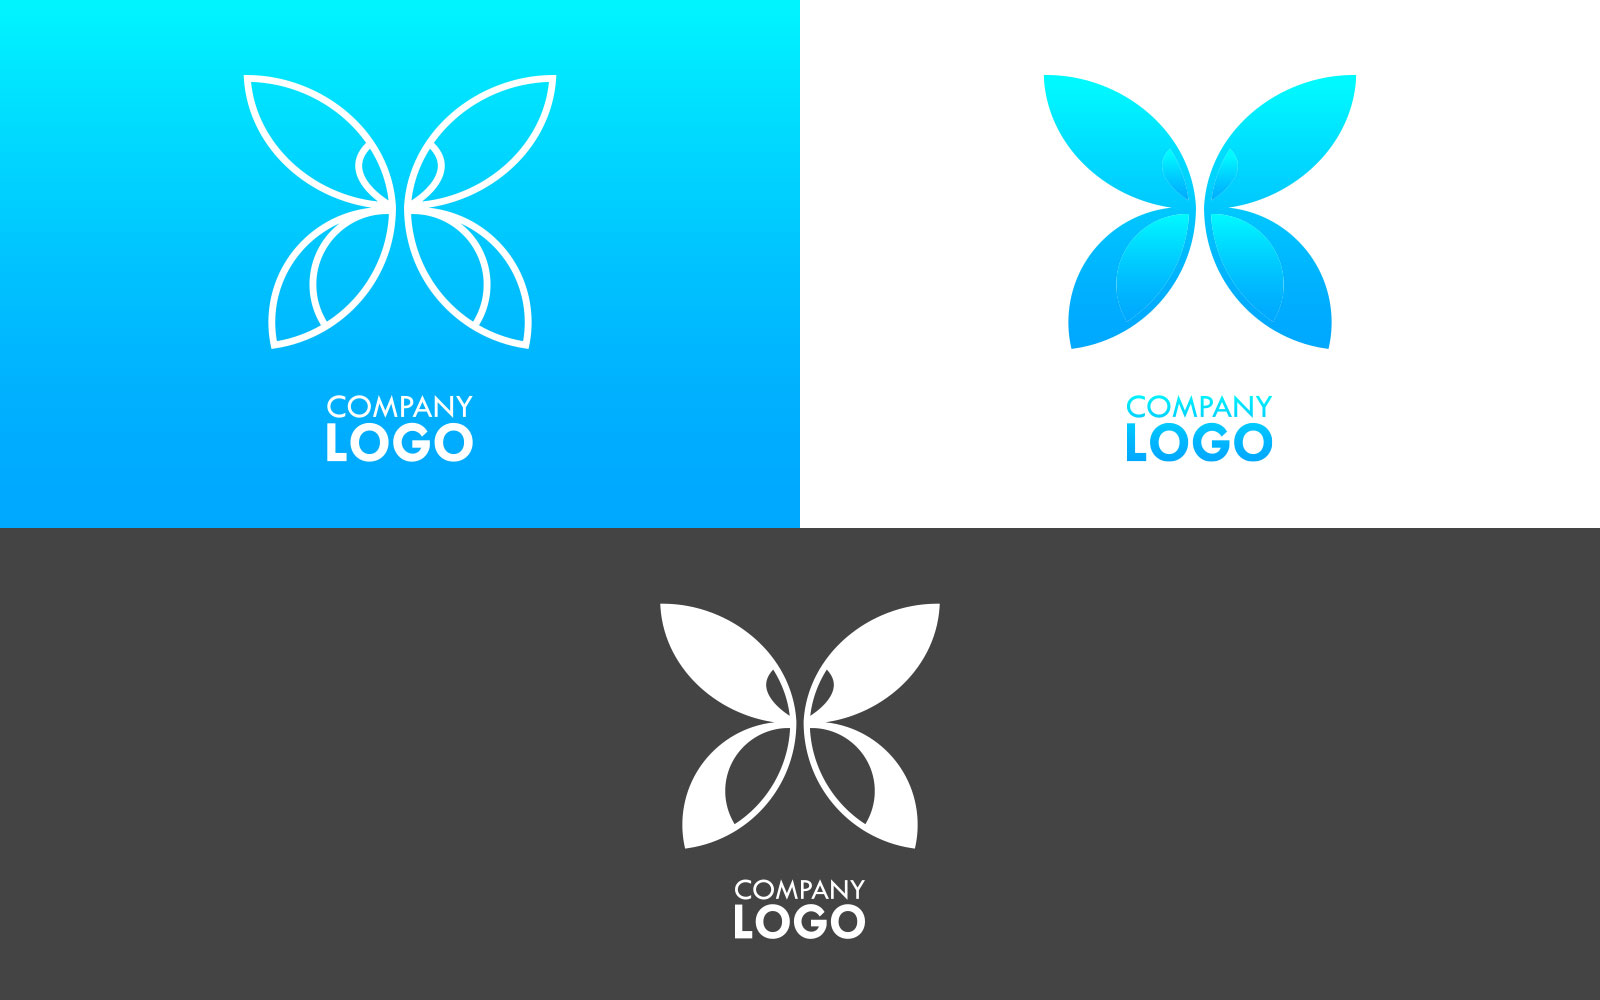 Cute butterfly logos in three options.